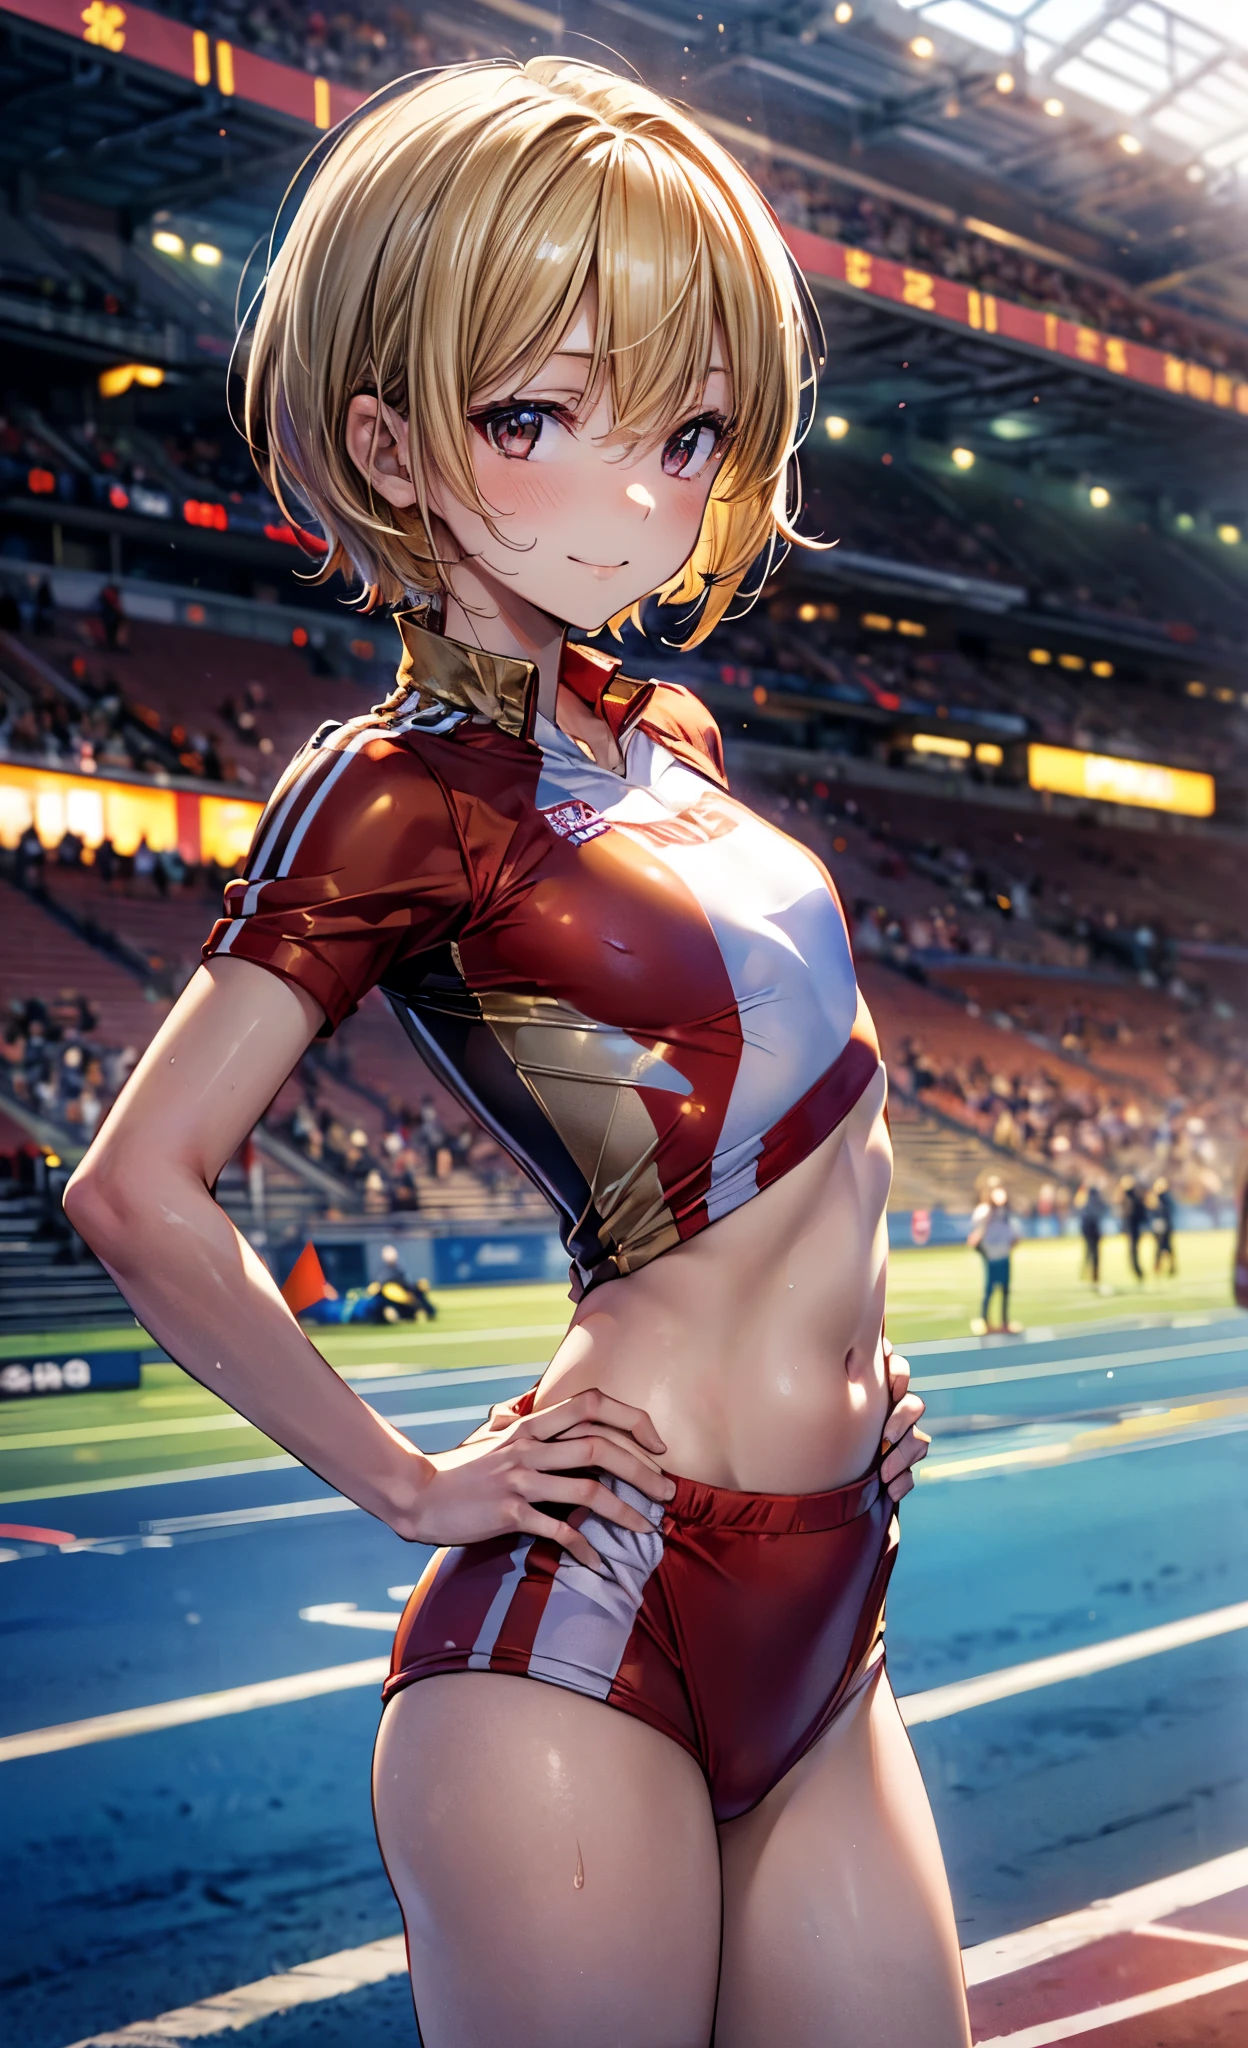 masterpiece, Highest quality, Super detailed, Ultra-high resolution, Highly detailed face, anime, Front angle, ((alone)), (((girl, Golden short hair))), (((Crimson track uniform, No sleeve))), Mid-chest, Slender body, (((A small smile))), ((exposing the abdomen)), Hands on hips, Stand in the athletics arena